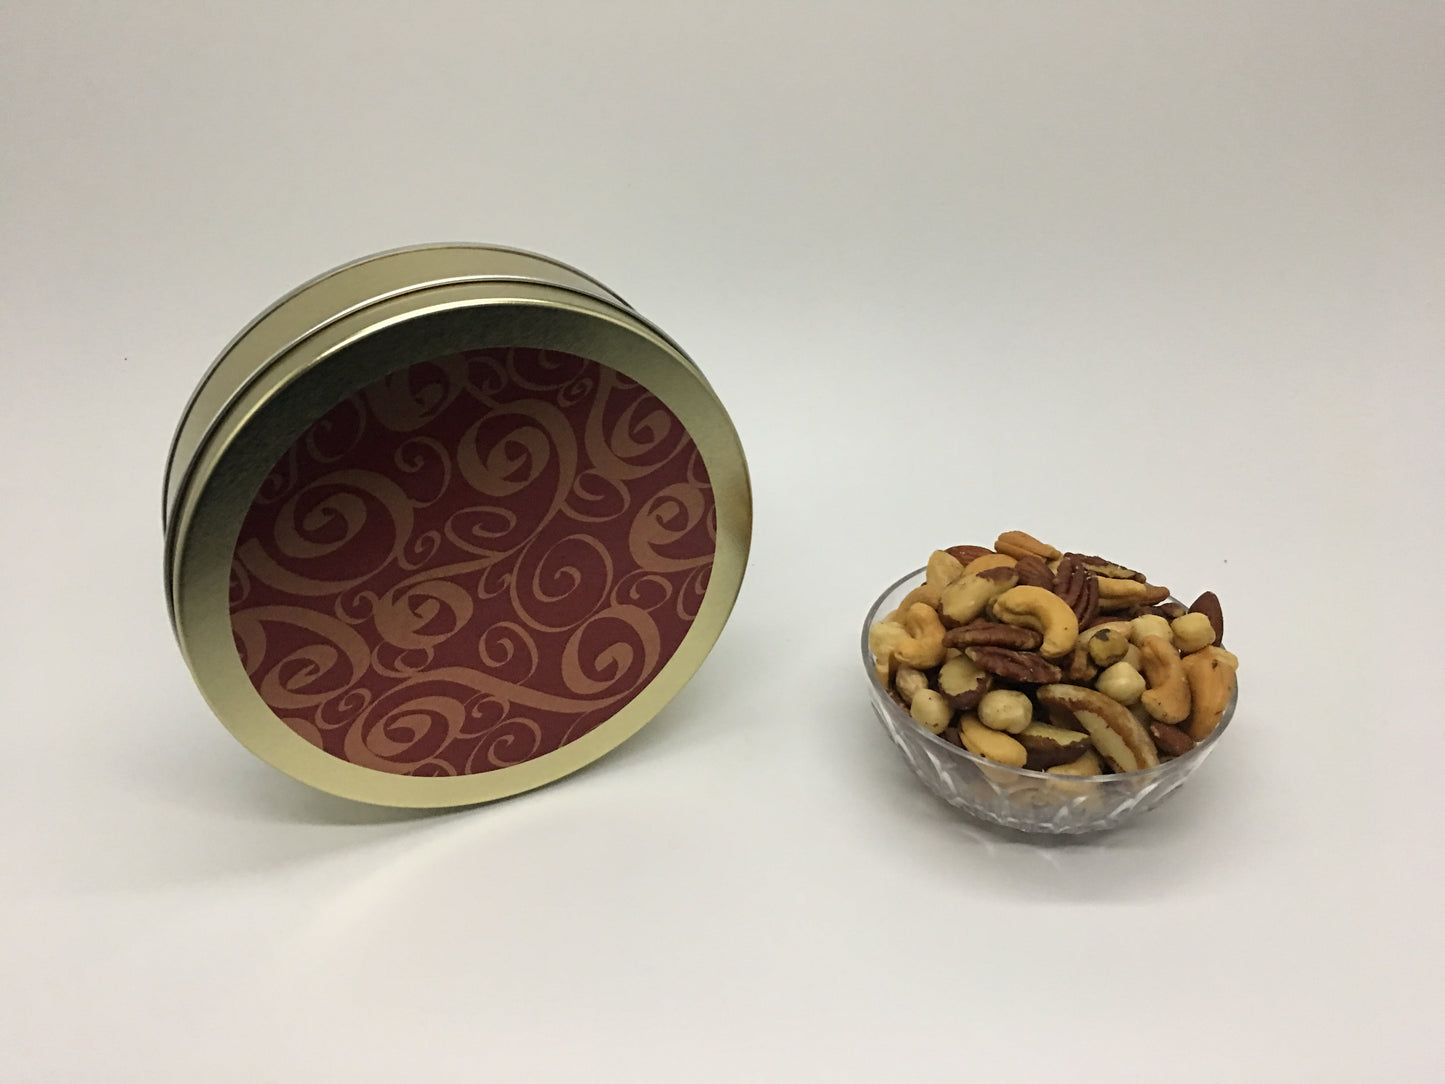 16 OZ. ROASTED UNSALTED MIXED NUT TIN